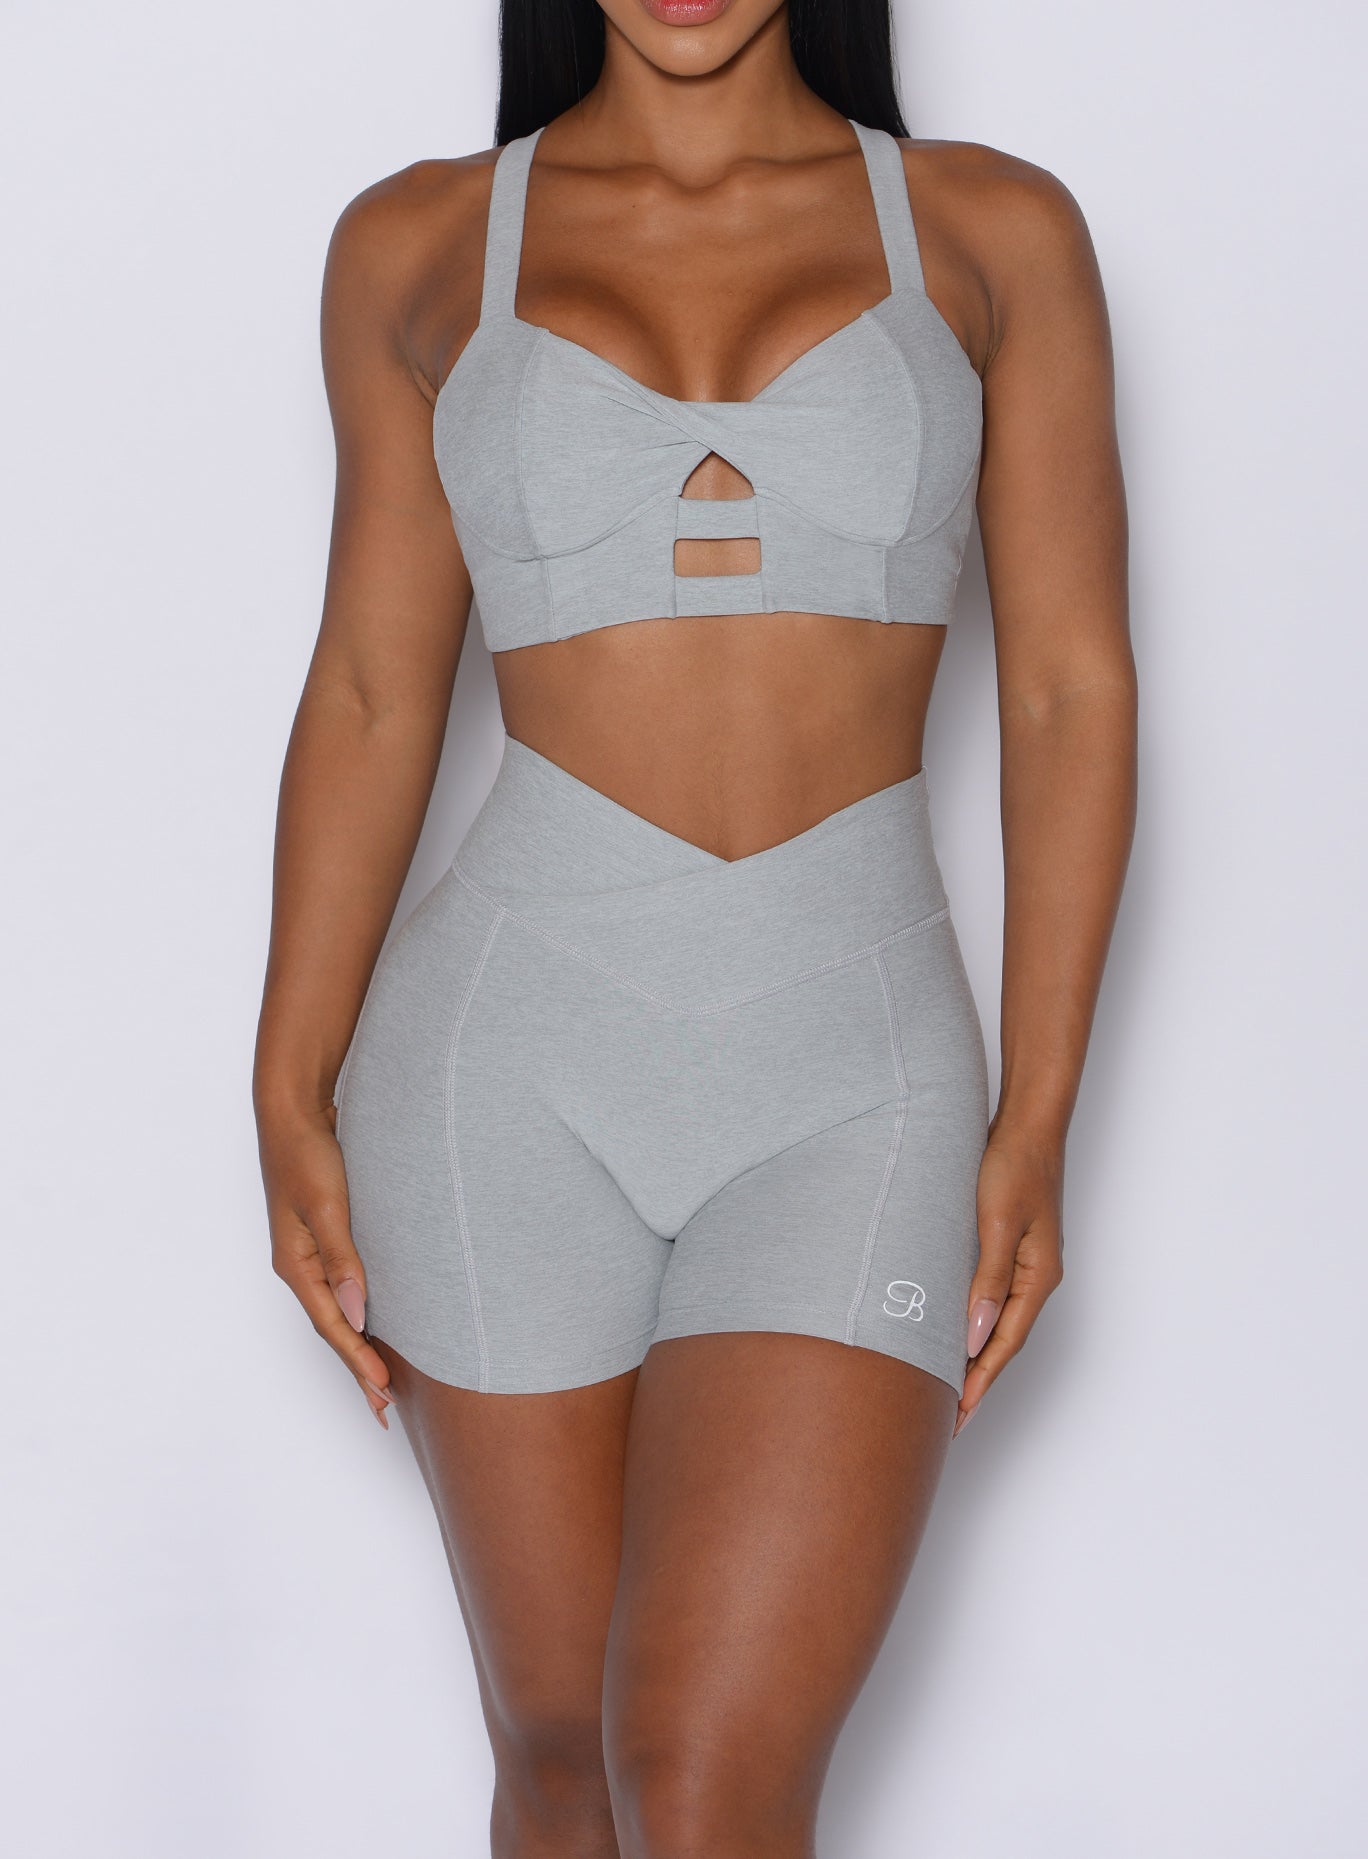 zoomed in front view of a model wearing our Tiny Waist Shorts in Light Cloud color and a matching sports bra